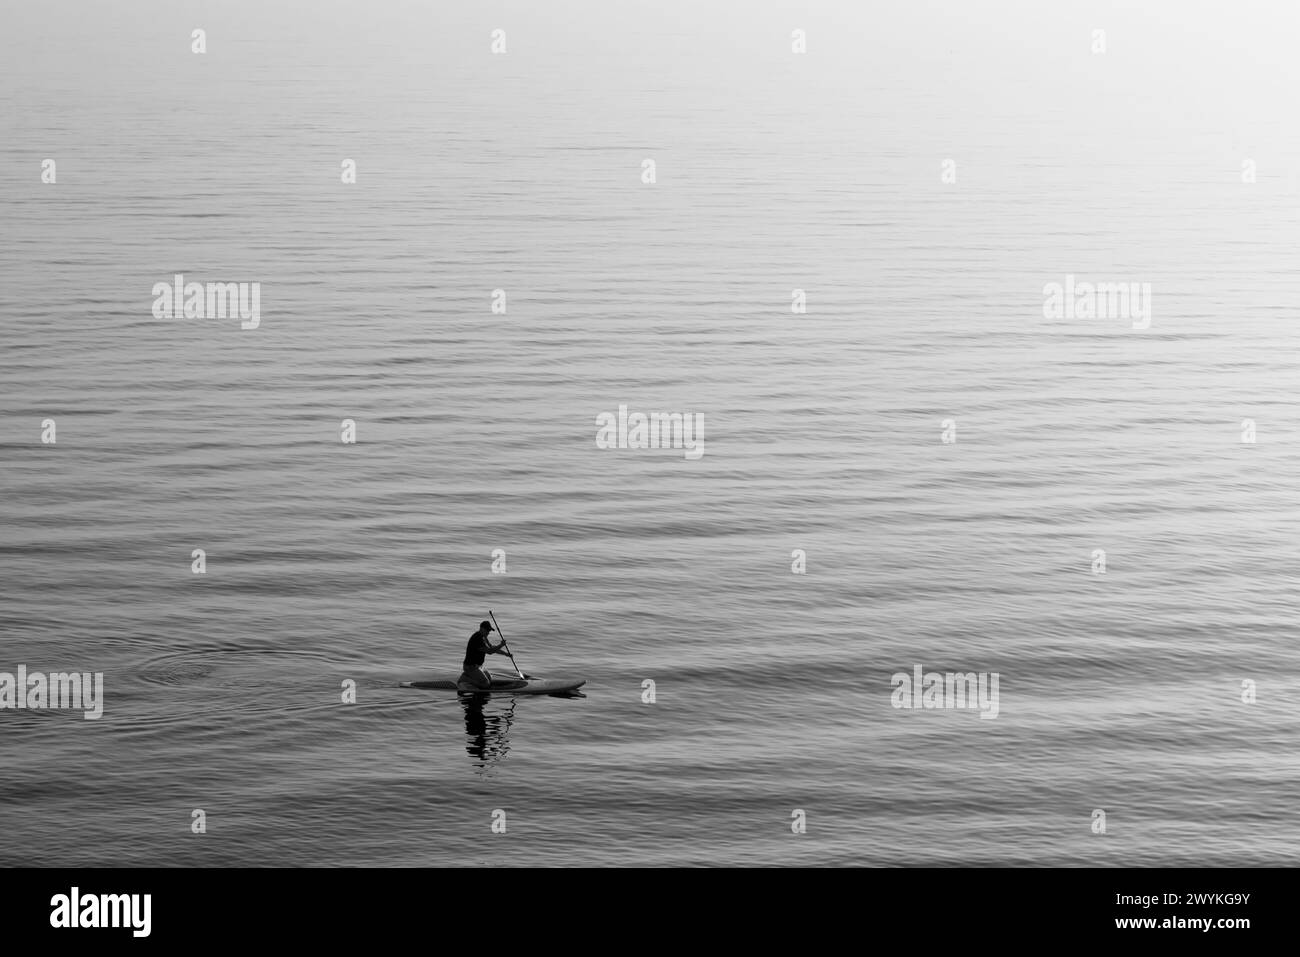 Silhouette of man paddle boarding Stock Photo